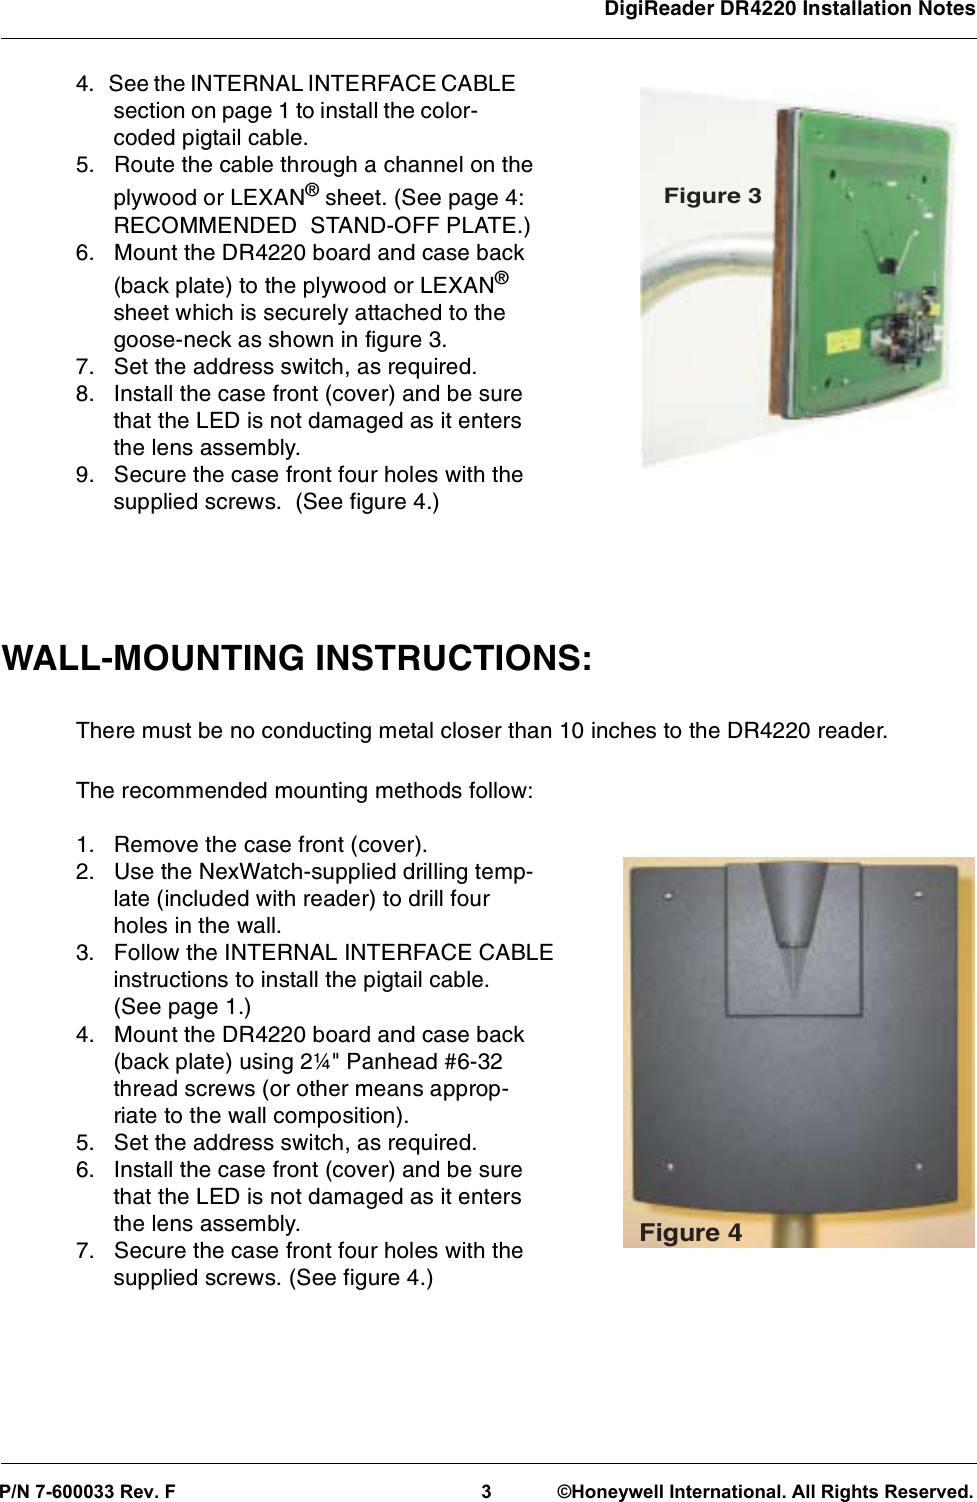 DigiReader DR4220 Installation Notes 4. See the INTERNAL INTERFACE CABLEsectiononpage1toinstallthecolor-coded pigtail cable.5. Route the cable through a channel on theplywood or LEXAN®sheet. (See page 4:RECOMMENDED STAND-OFF PLATE.)6. Mount the DR4220 board and case back(back plate) to the plywood or LEXAN®sheet which is securely attached to thegoose-neck as shown in figure 3.7. Set the address switch, as required.8. Install the case front (cover) and be surethat the LED is not damaged as it entersthe lens assembly.9. Secure the case front four holes with thesupplied screws. (See figure 4.)WALL-MOUNTING INSTRUCTIONS:There must be no conducting metal closer than 10 inches to the DR4220 reader.The recommended mounting methods follow:1. Remove the case front (cover).2. Use the NexWatch-supplied drilling temp-late (included with reader) to drill fourholes in the wall.3. Follow the INTERNAL INTERFACE CABLEinstructions to install the pigtail cable.(See page 1.)4. Mount the DR4220 board and case back(back plate) using 2¼&quot; Panhead #6-32thread screws (or other means approp-riate to the wall composition).5. Set the address switch, as required.6. Install the case front (cover) and be surethat the LED is not damaged as it entersthe lens assembly.7. Secure the case front four holes with thesupplied screws. (See figure 4.)Figure 4Figure 3 P/N 7-600033 Rev. F3 ©Honeywell International. All Rights Reserved.